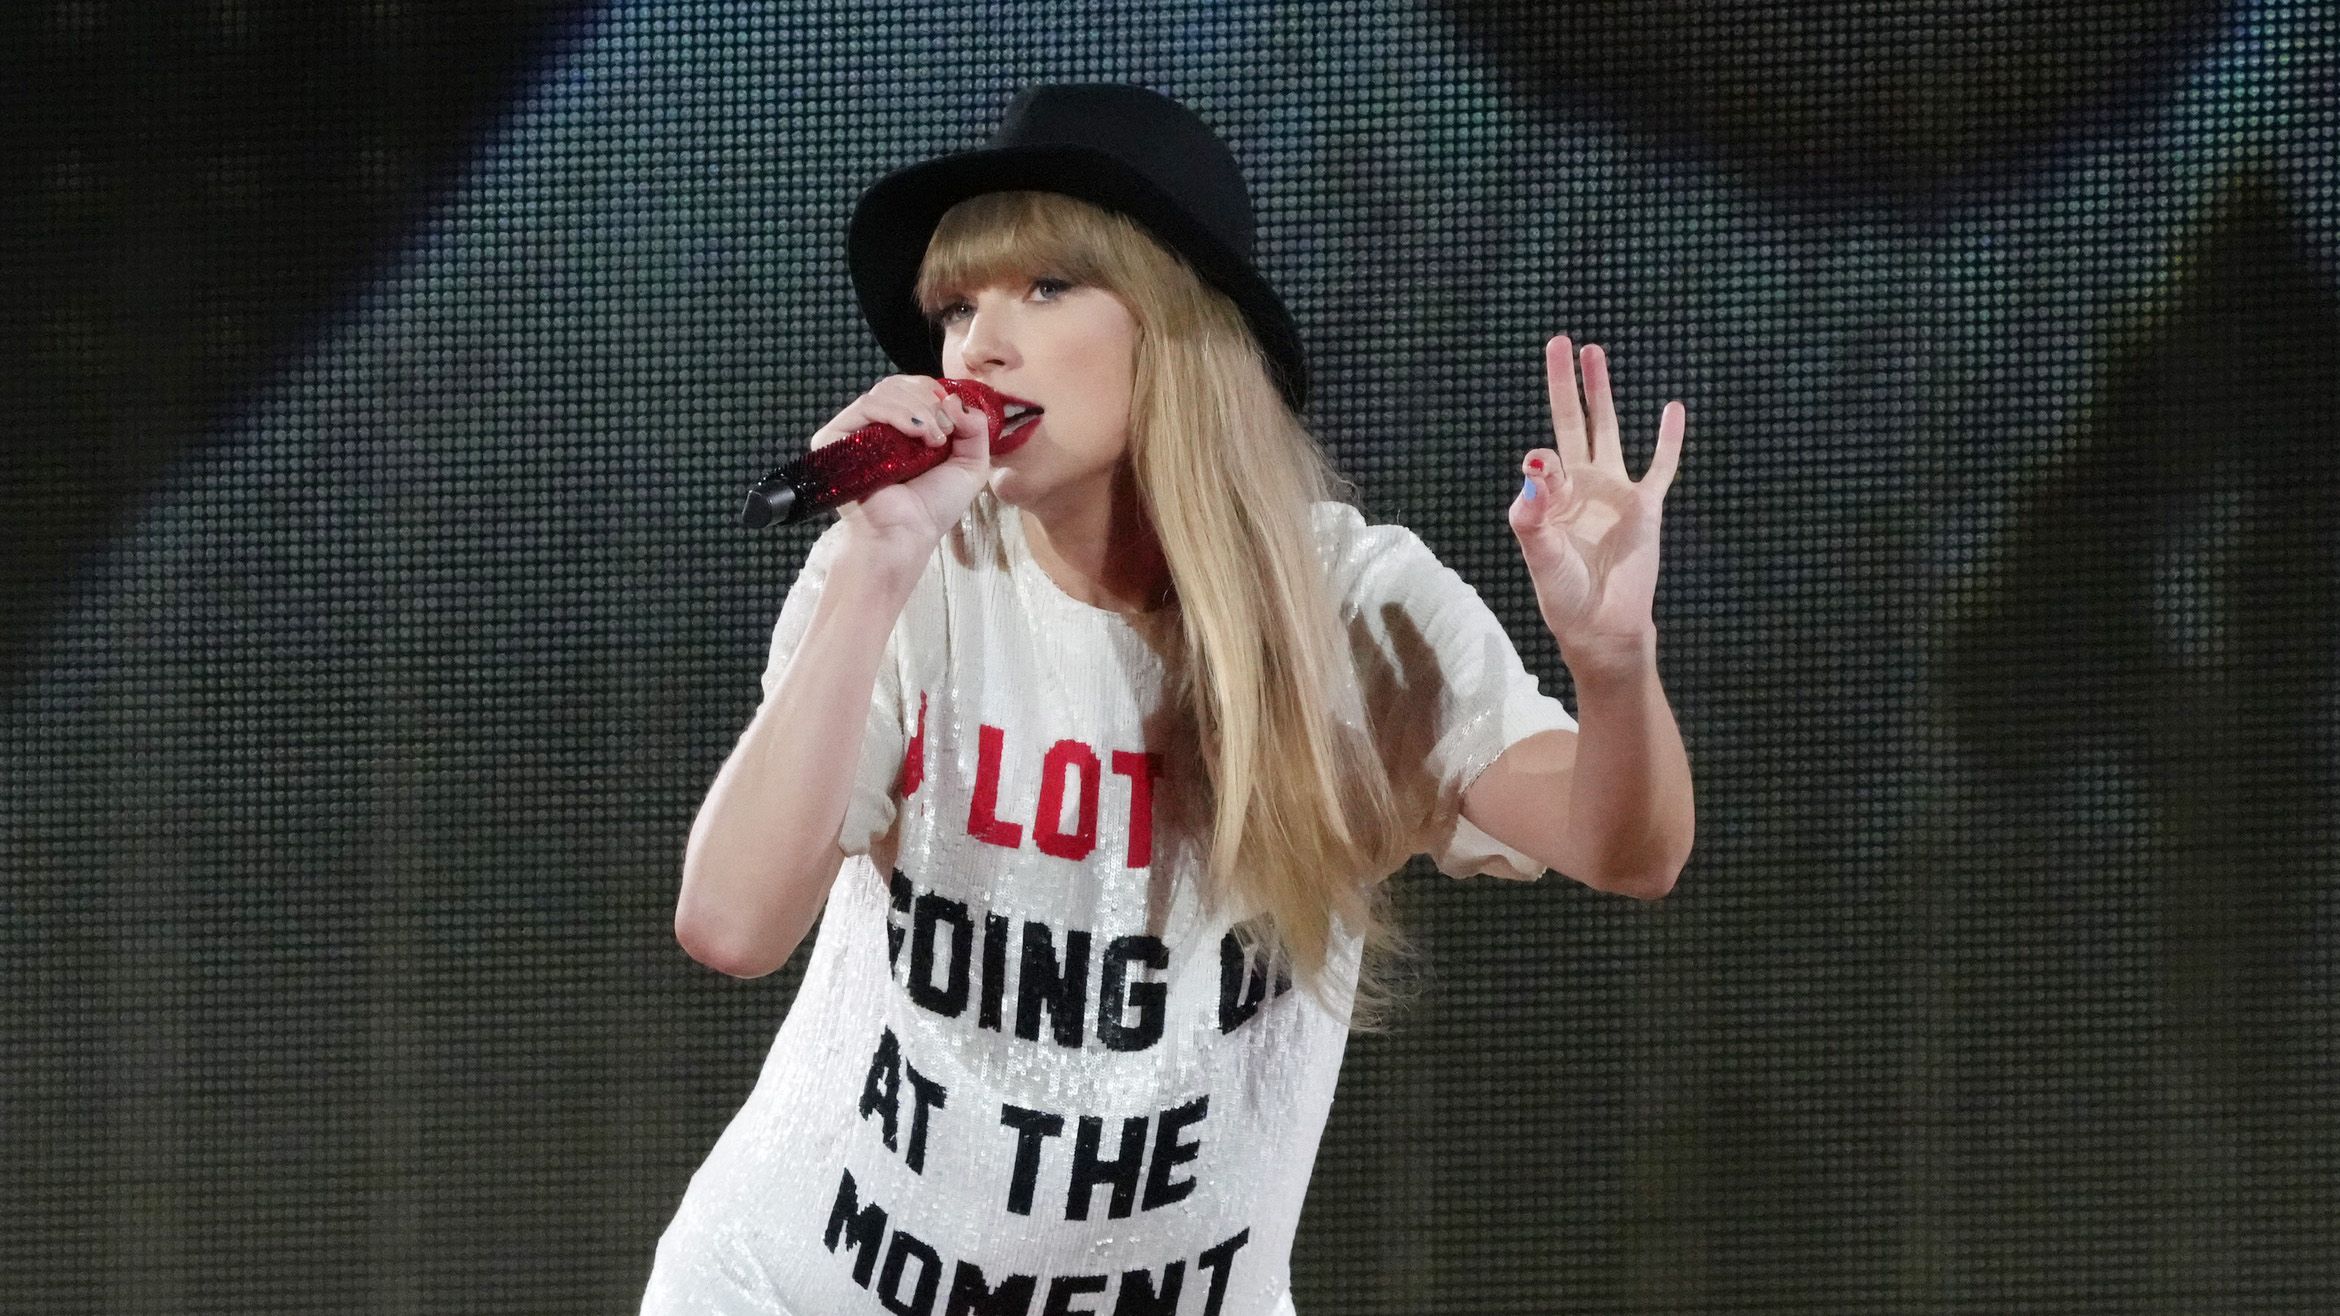 The Eras Tour Taylor Swift A Lot Going On At The Moment T-Shirt